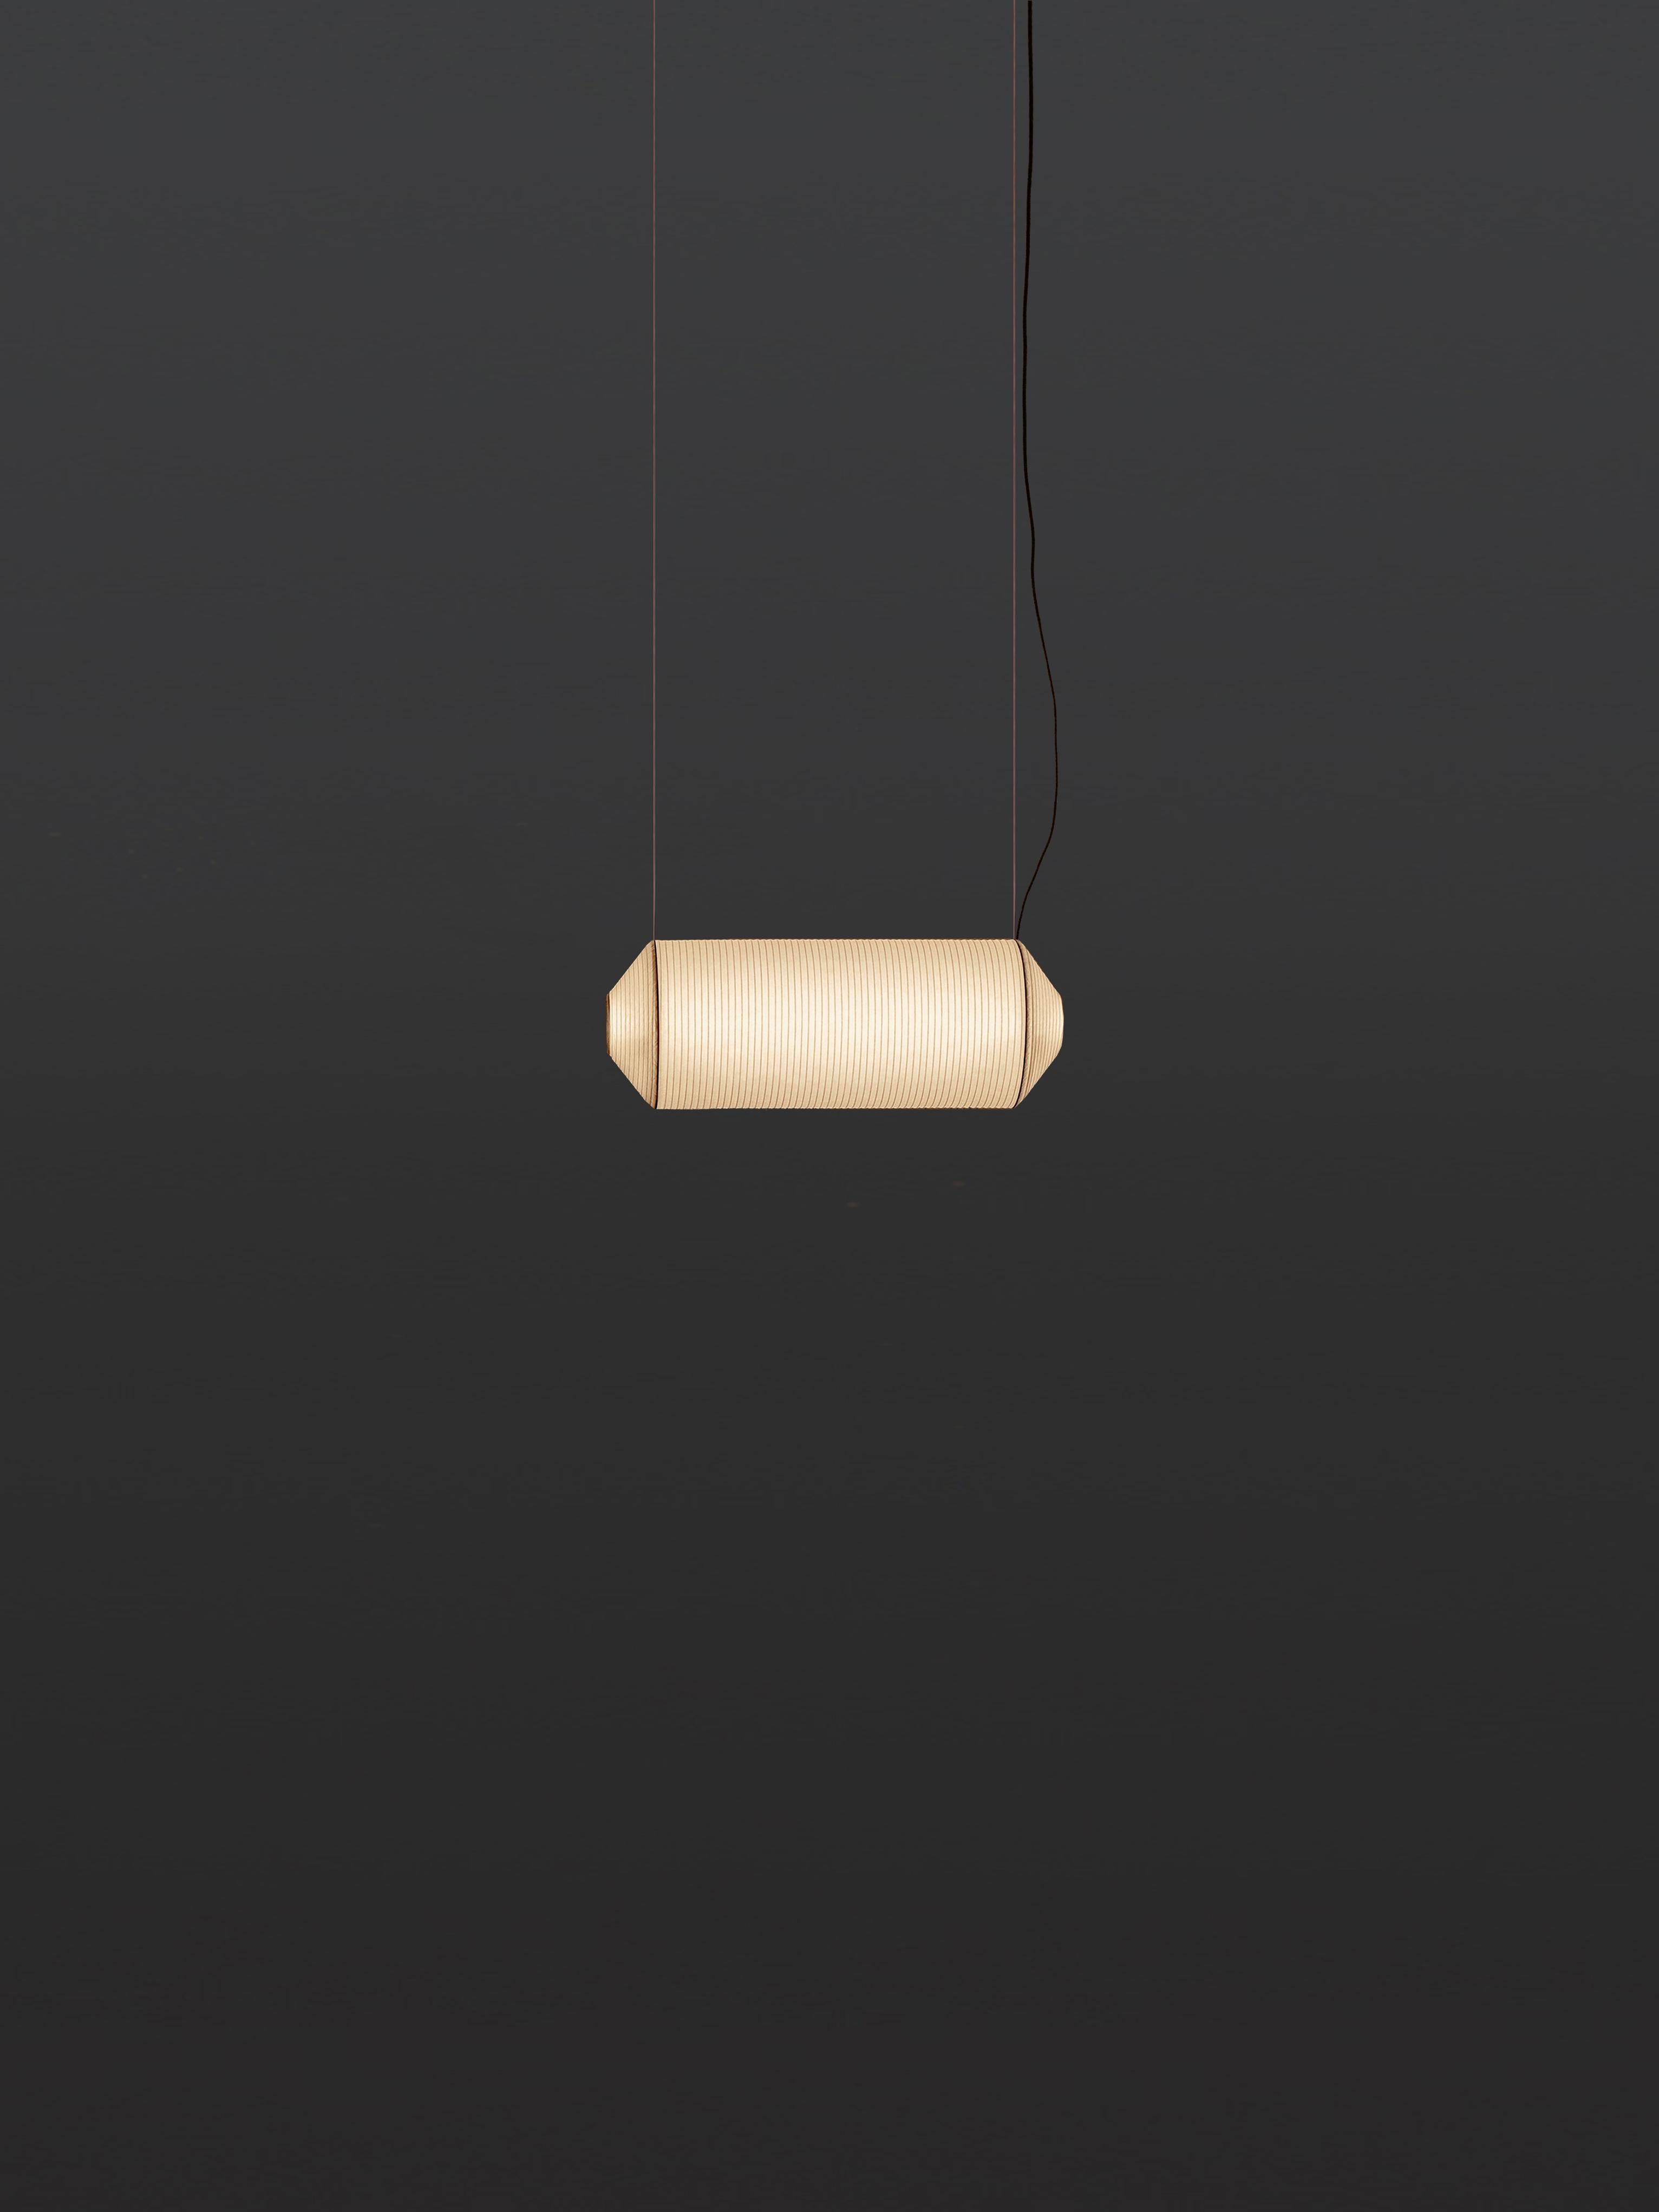 Tekiò Horizontal P1 pendant lamp by Anthony Dickens
Dimensions: D 25 x W 67 x H 25 cm
Materials: Metal, Washi japanese paper shade.
Available in circular or rectangular canopy.

Tekiò, the Japanese word for adaptation, merges ancient artisan